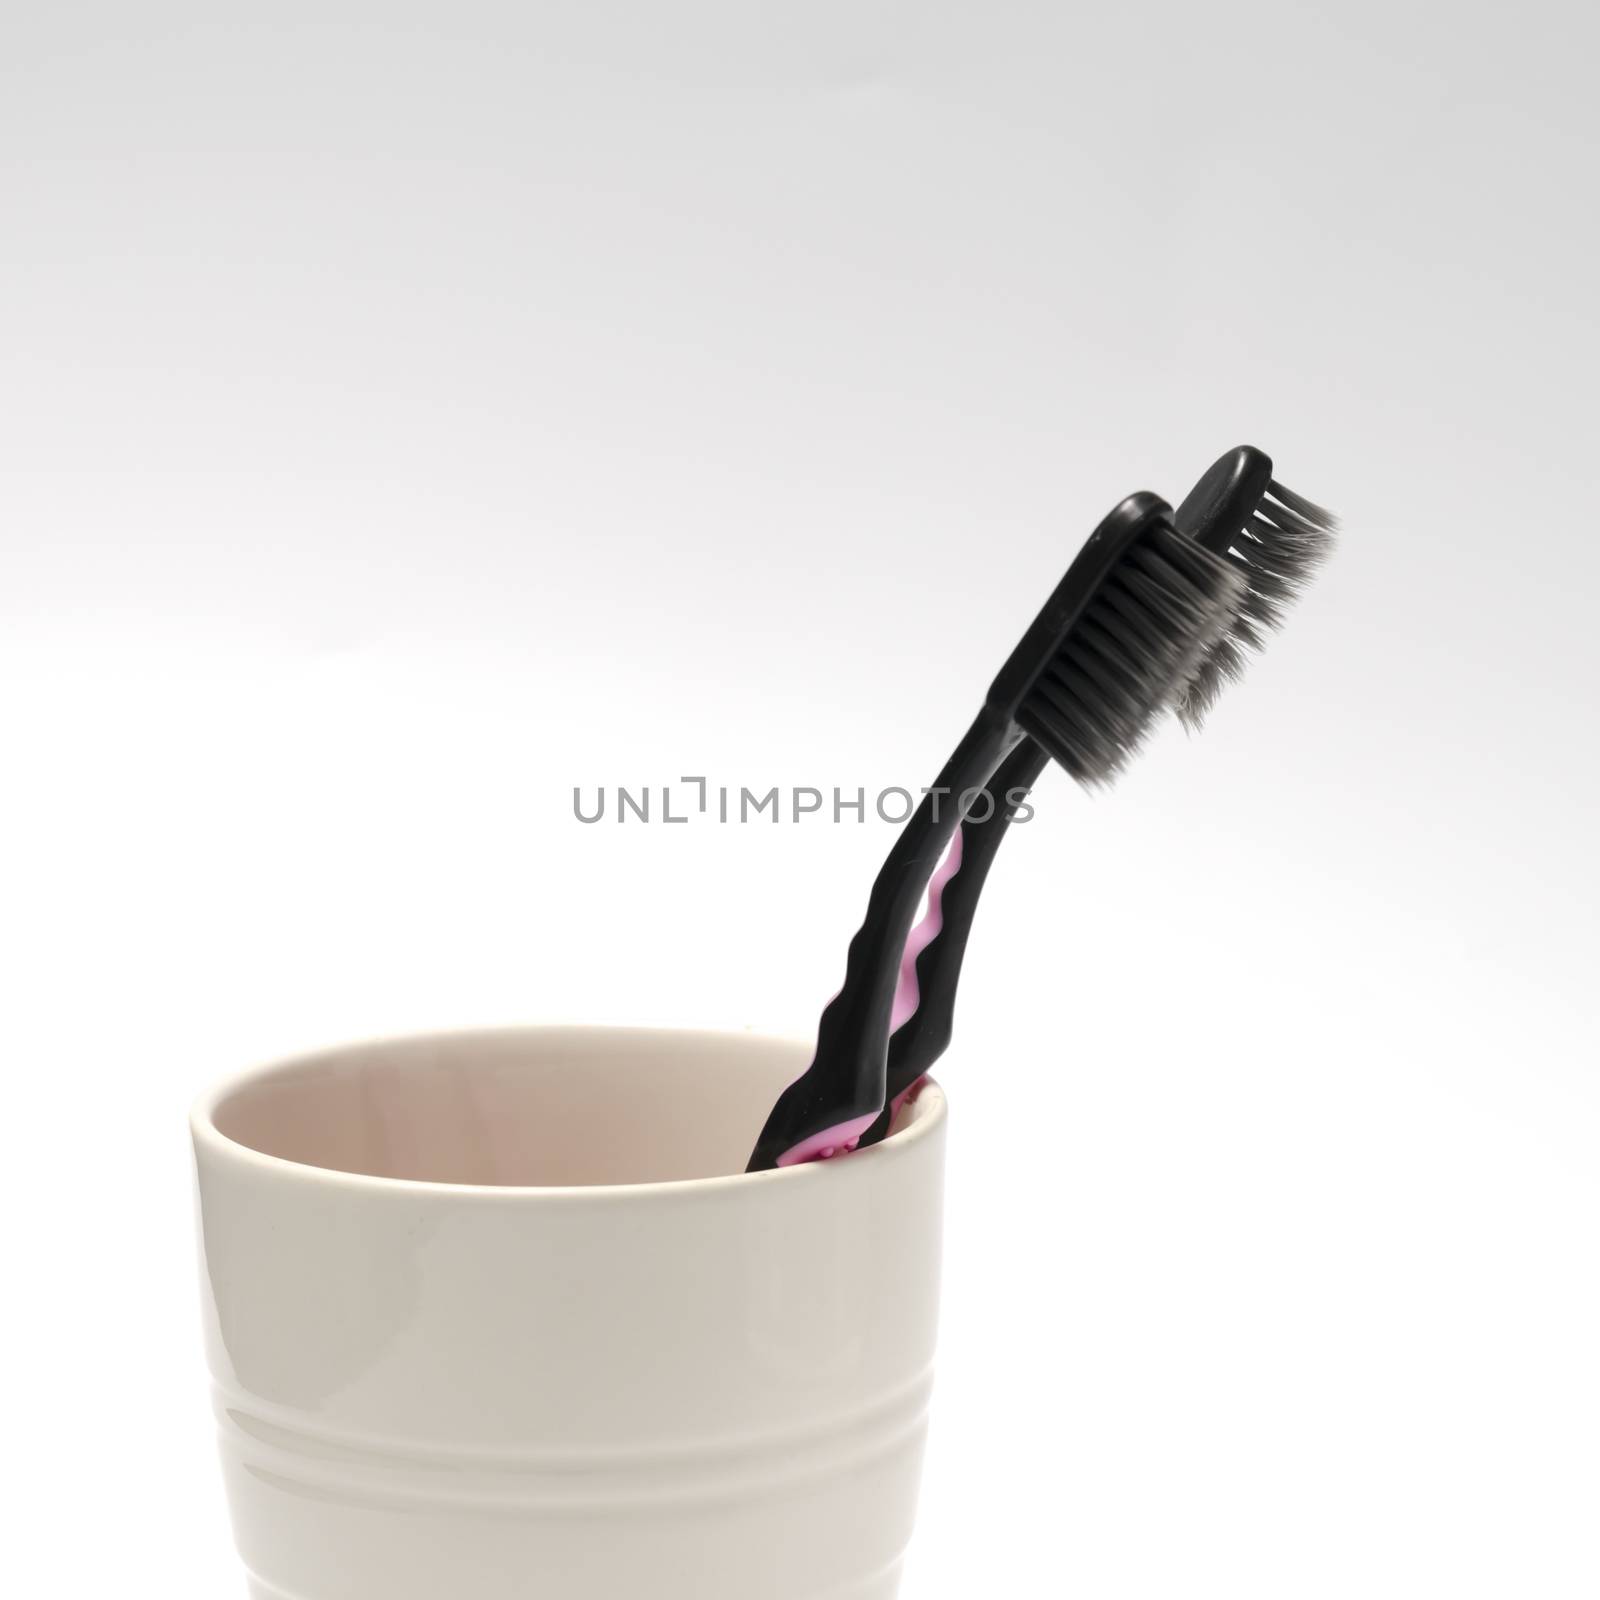 tooth brush in glass on a white background